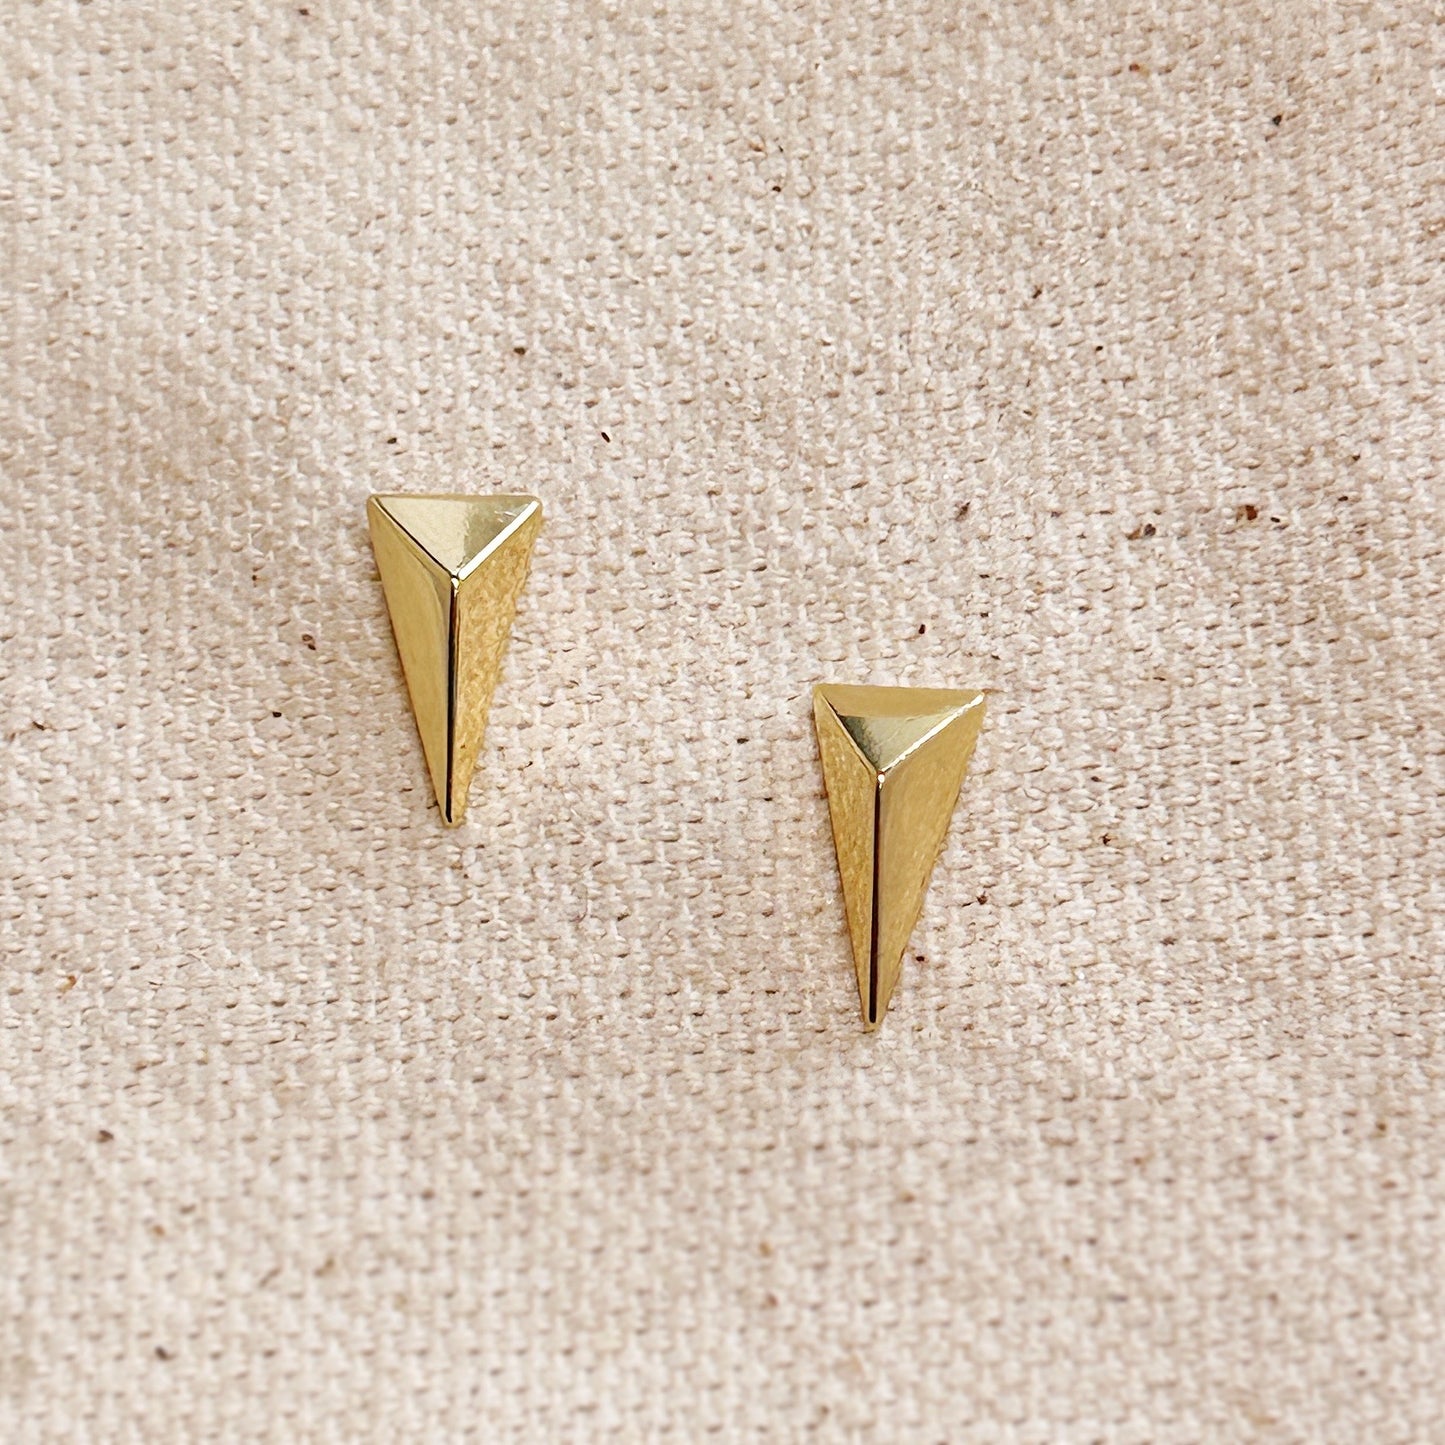 Elongated Faceted Triangle Stackable Earrings